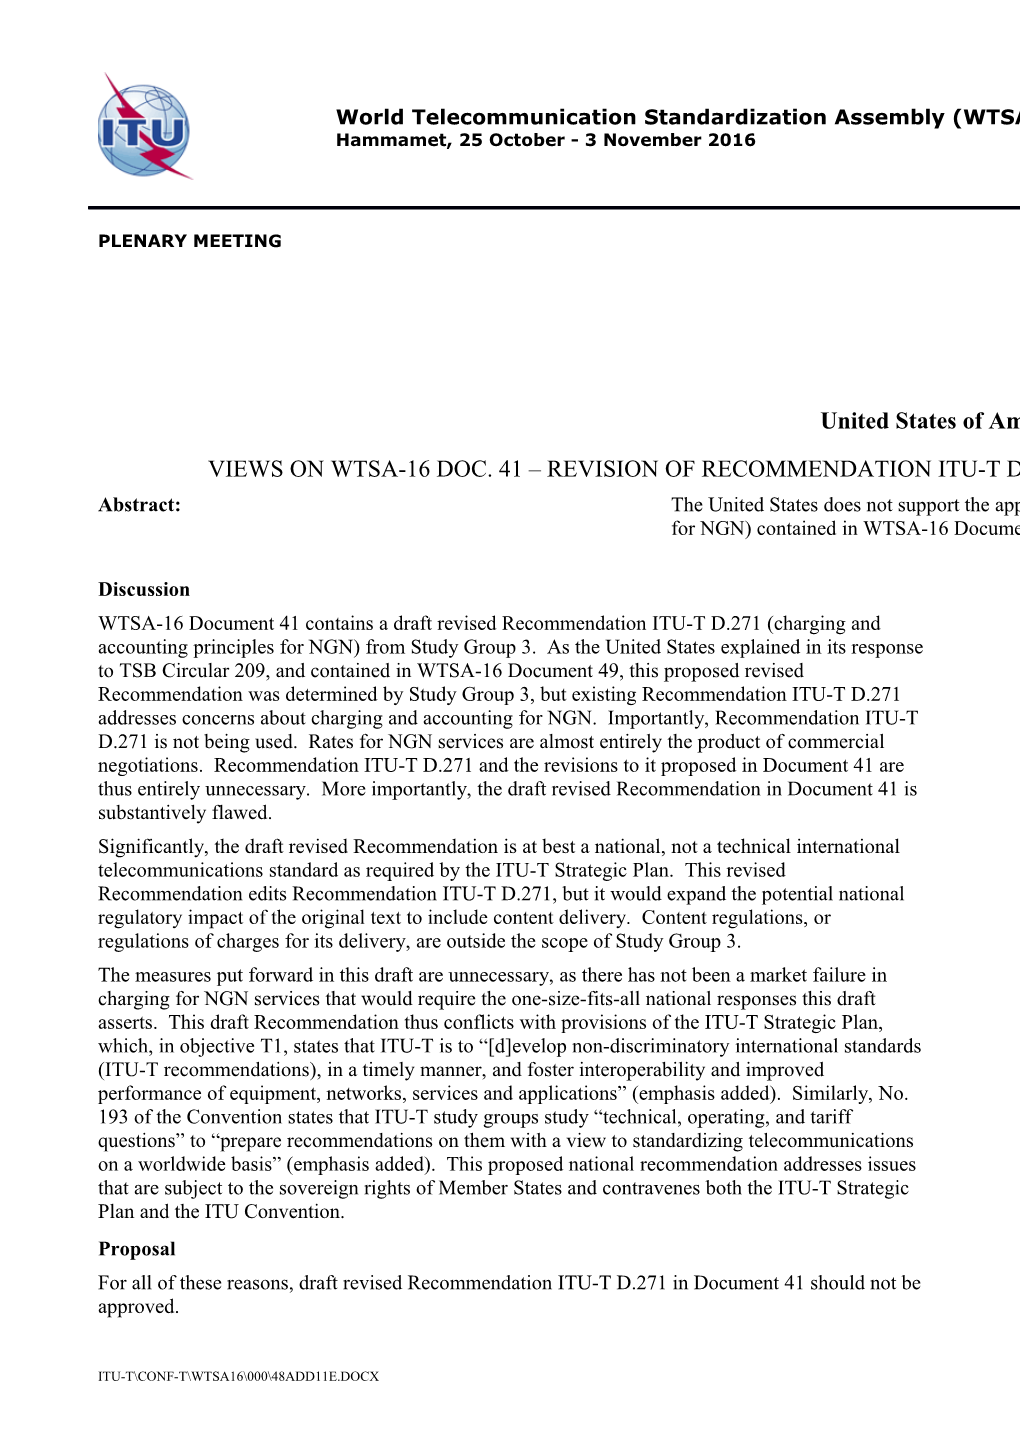 WTSA-16 Document 41 Contains a Draft Revised Recommendation ITU-T D.271 (Charging and Accounting